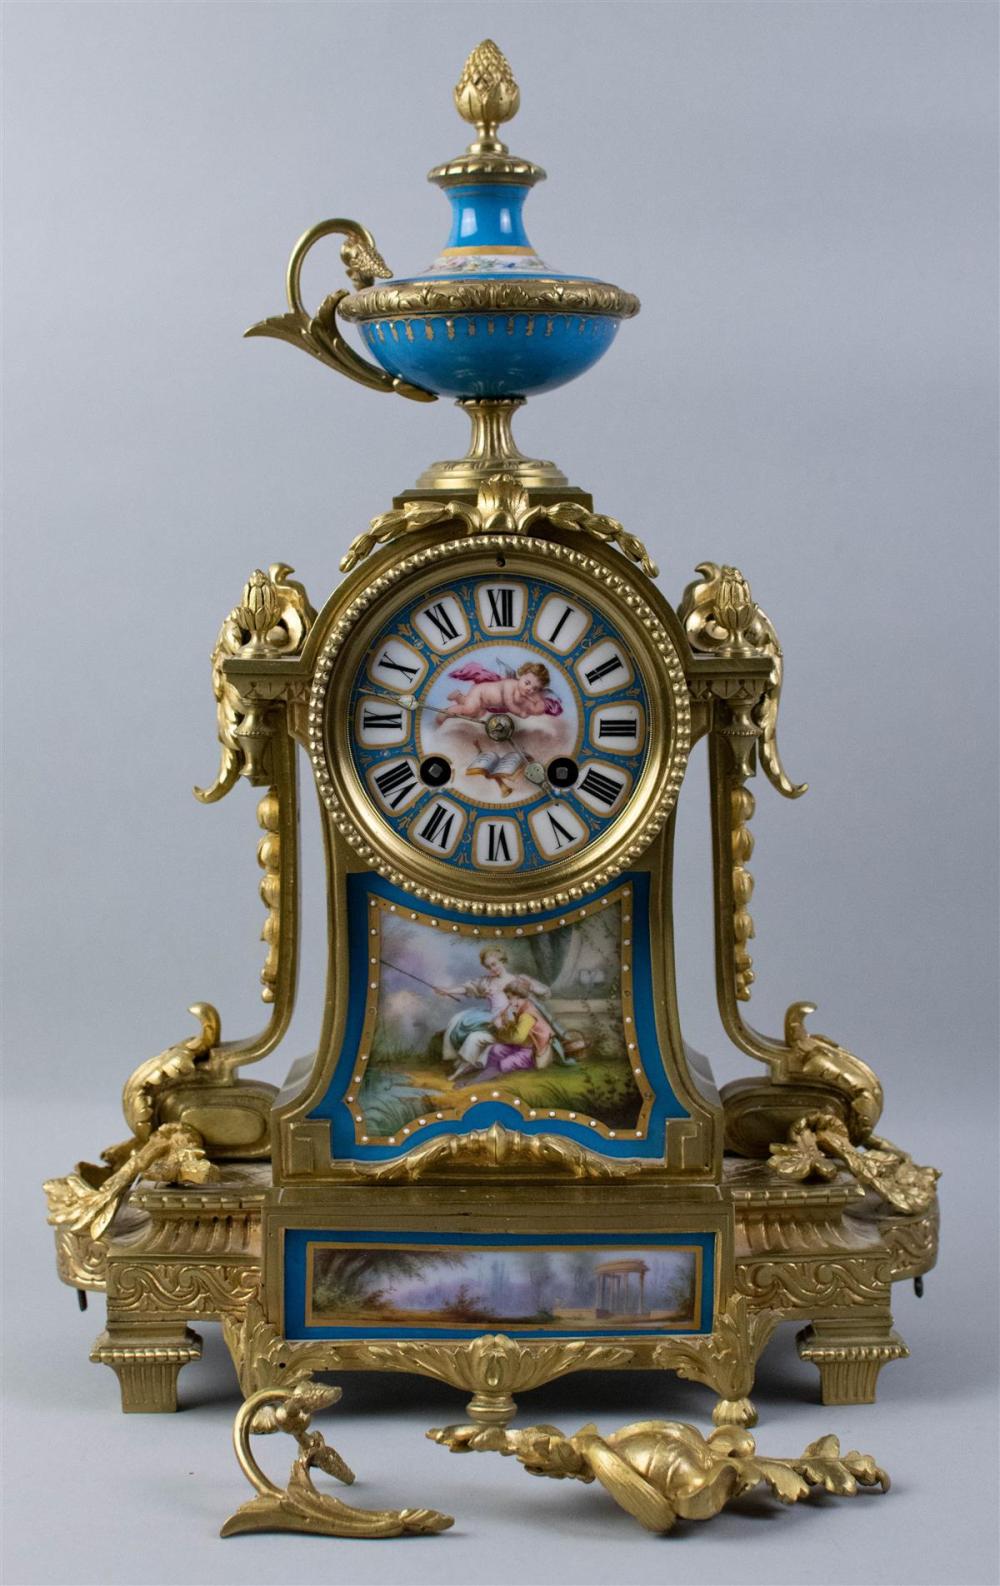 GILT-BRONZE MANTEL CLOCK WITH SEVRES-STYLE